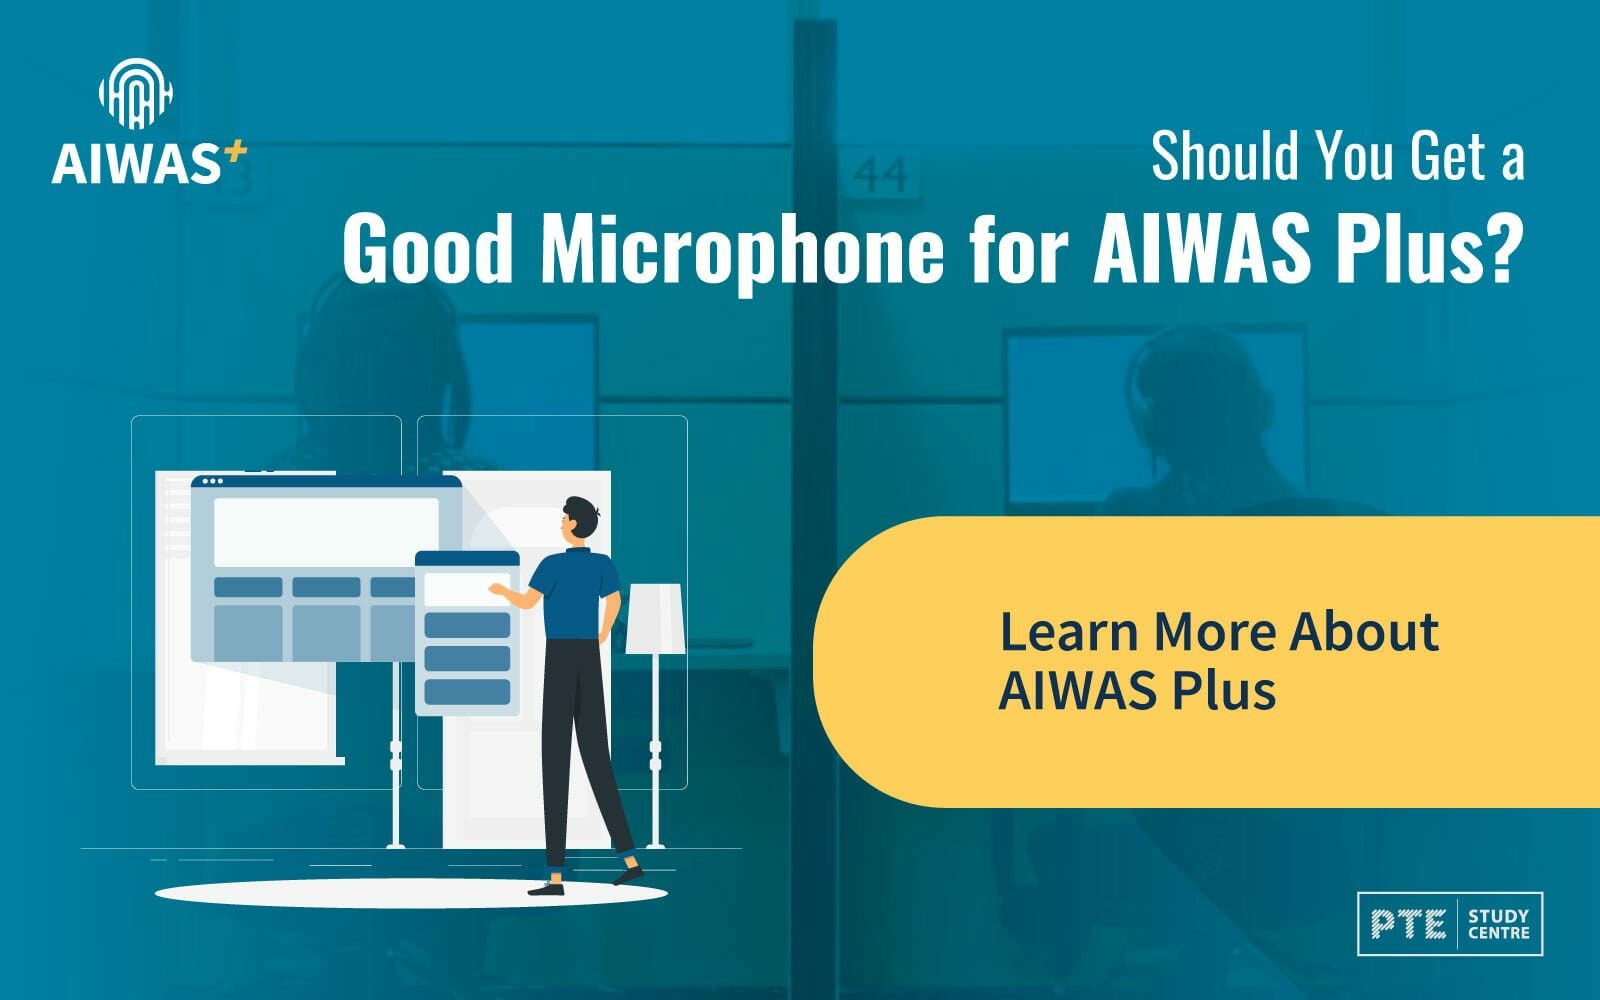 Should You Get a Good Microphone for AIWAS Plus?